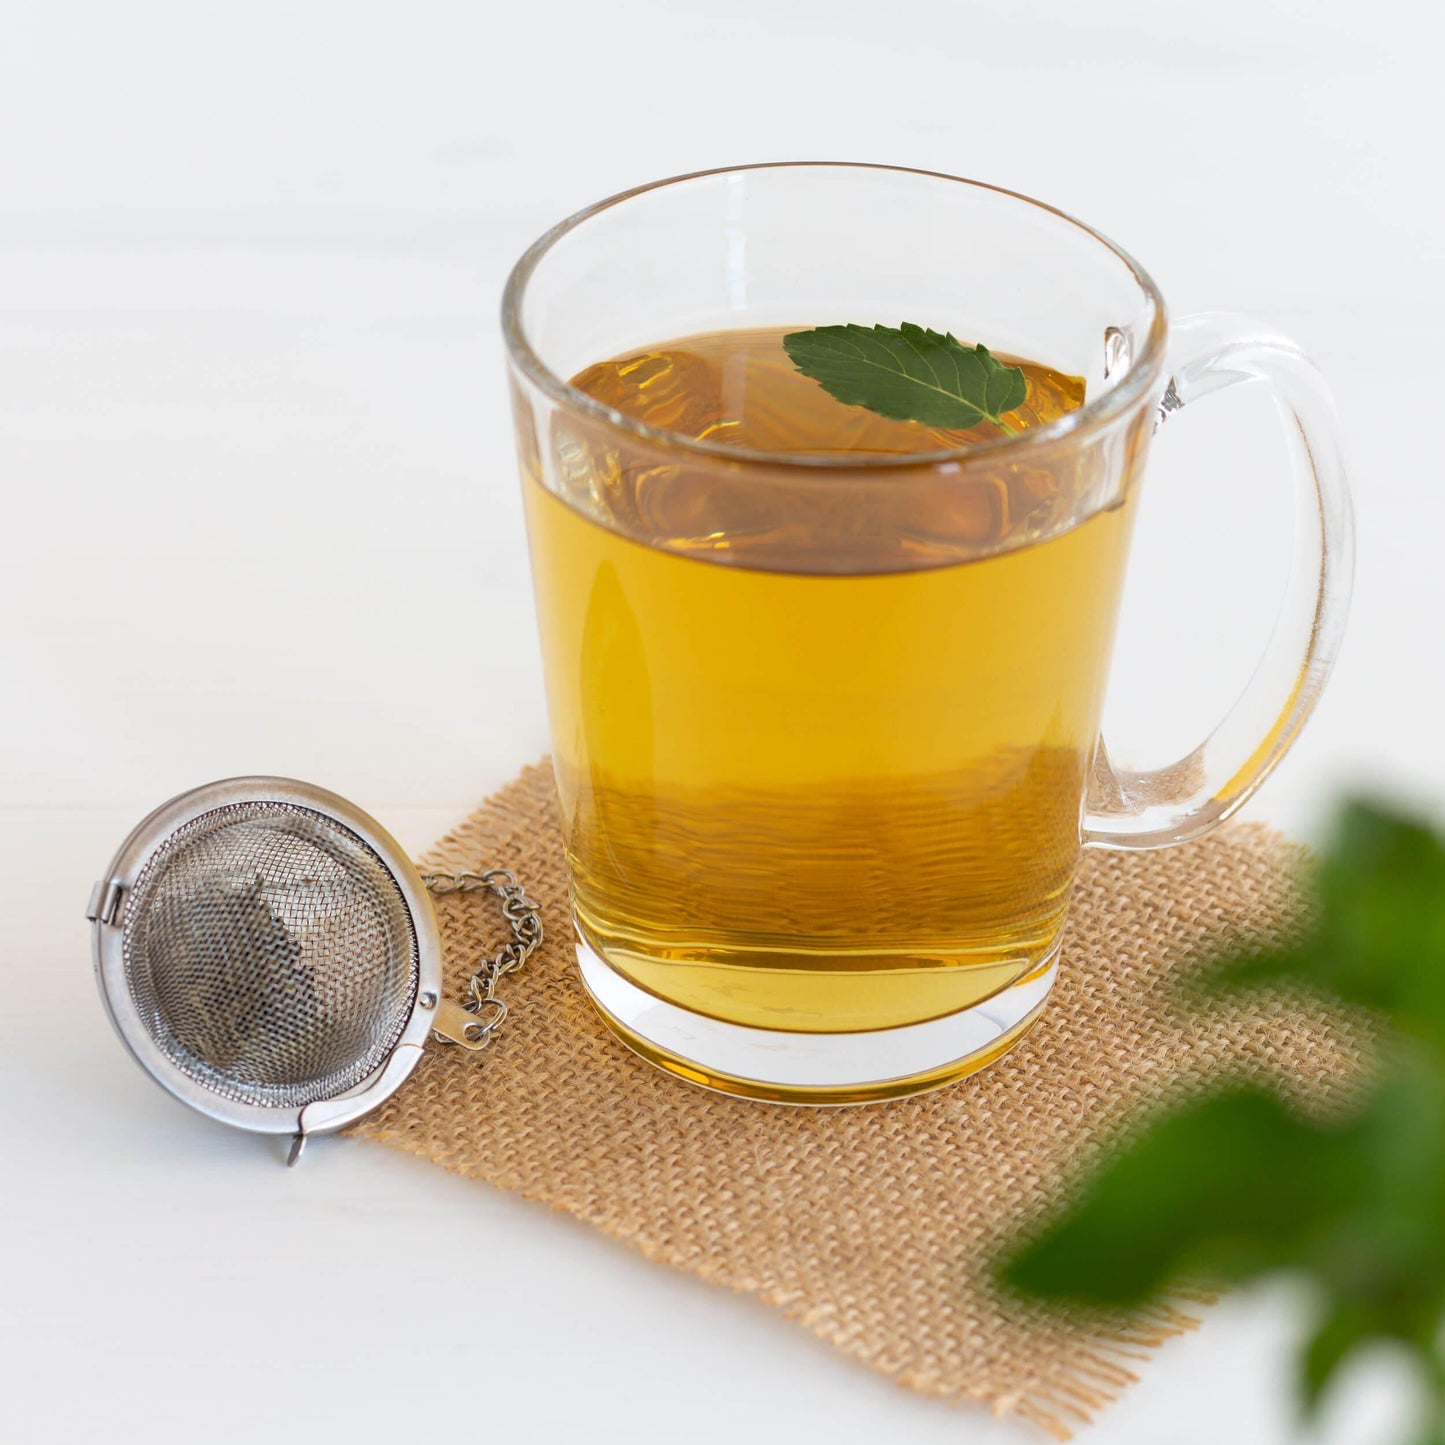 Peppermint Organic Herbal Tea shown as brewed tea in a glass mug, displayed on a square of burlap with a mesh teaball and mint leaves